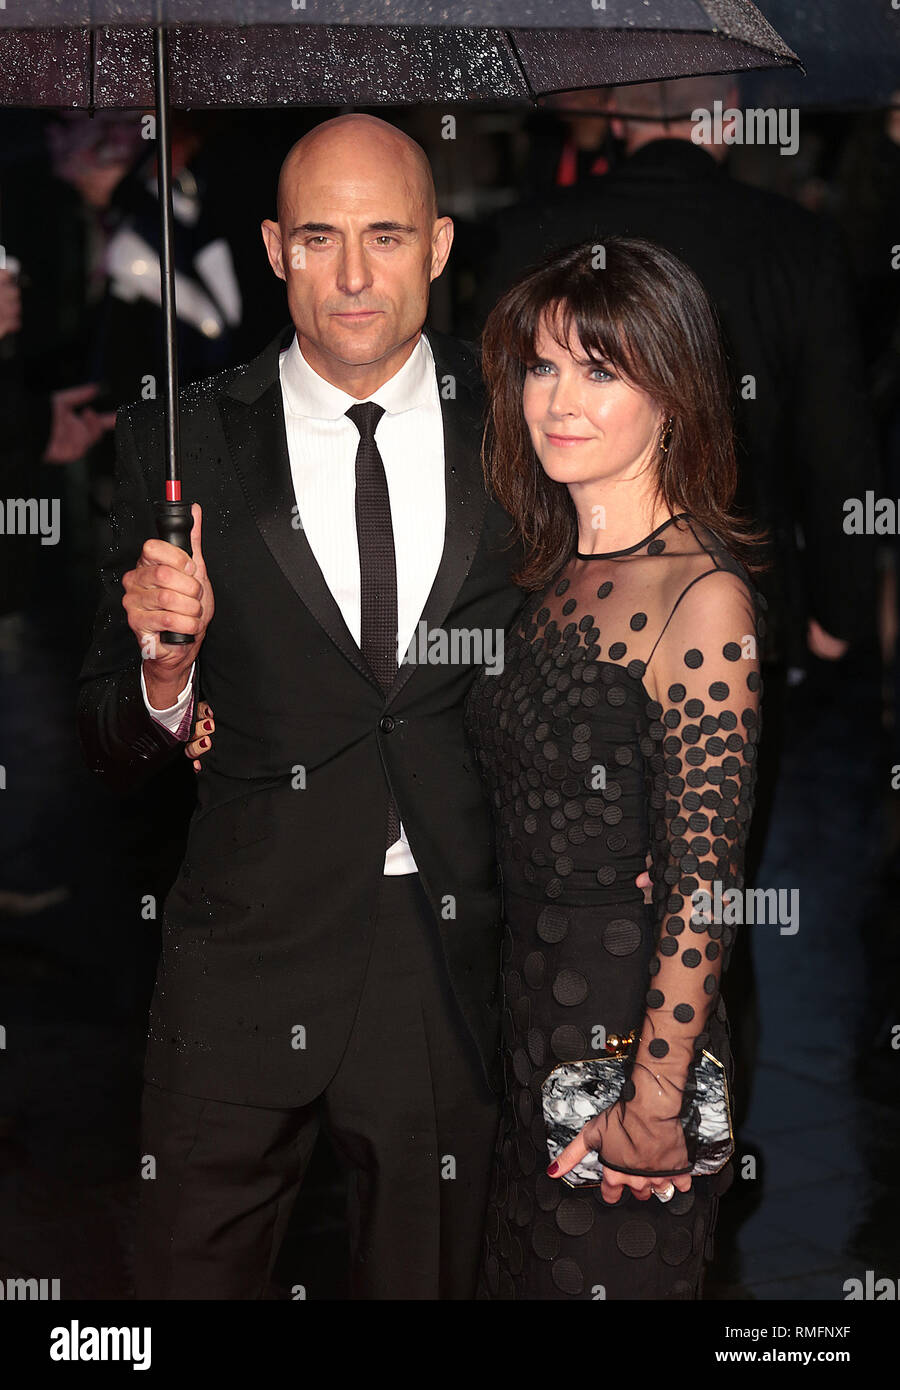 Oct 08, 2014 - 'The Imitation Game' - Opening Night Gala VIP Arrivals - 58th London Film Festival Photo Shows: Liza Marshall; Mark Strong Stock Photo